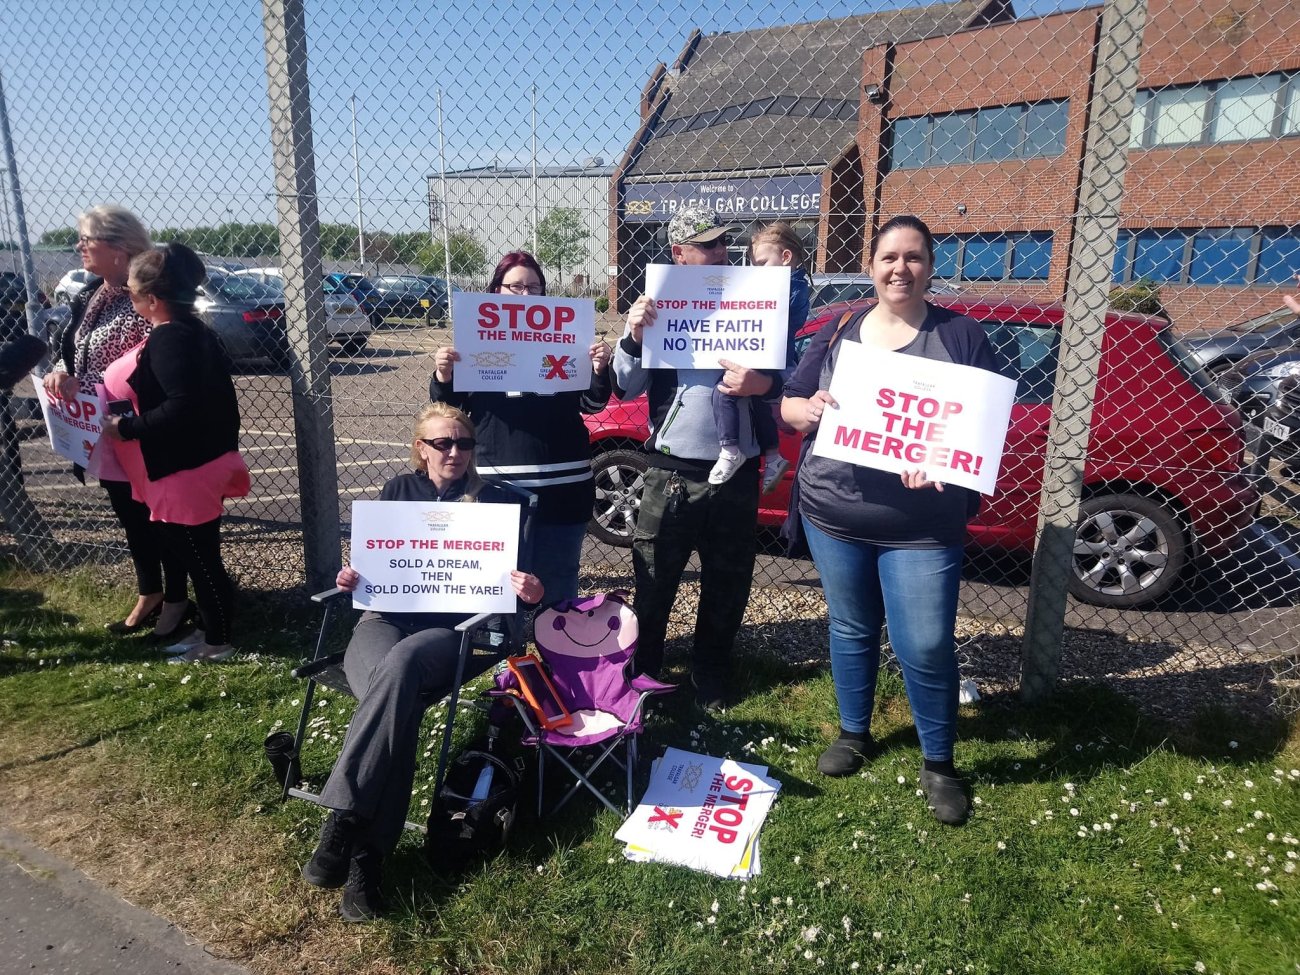 Parents protest imposition of religious status on Norfolk school